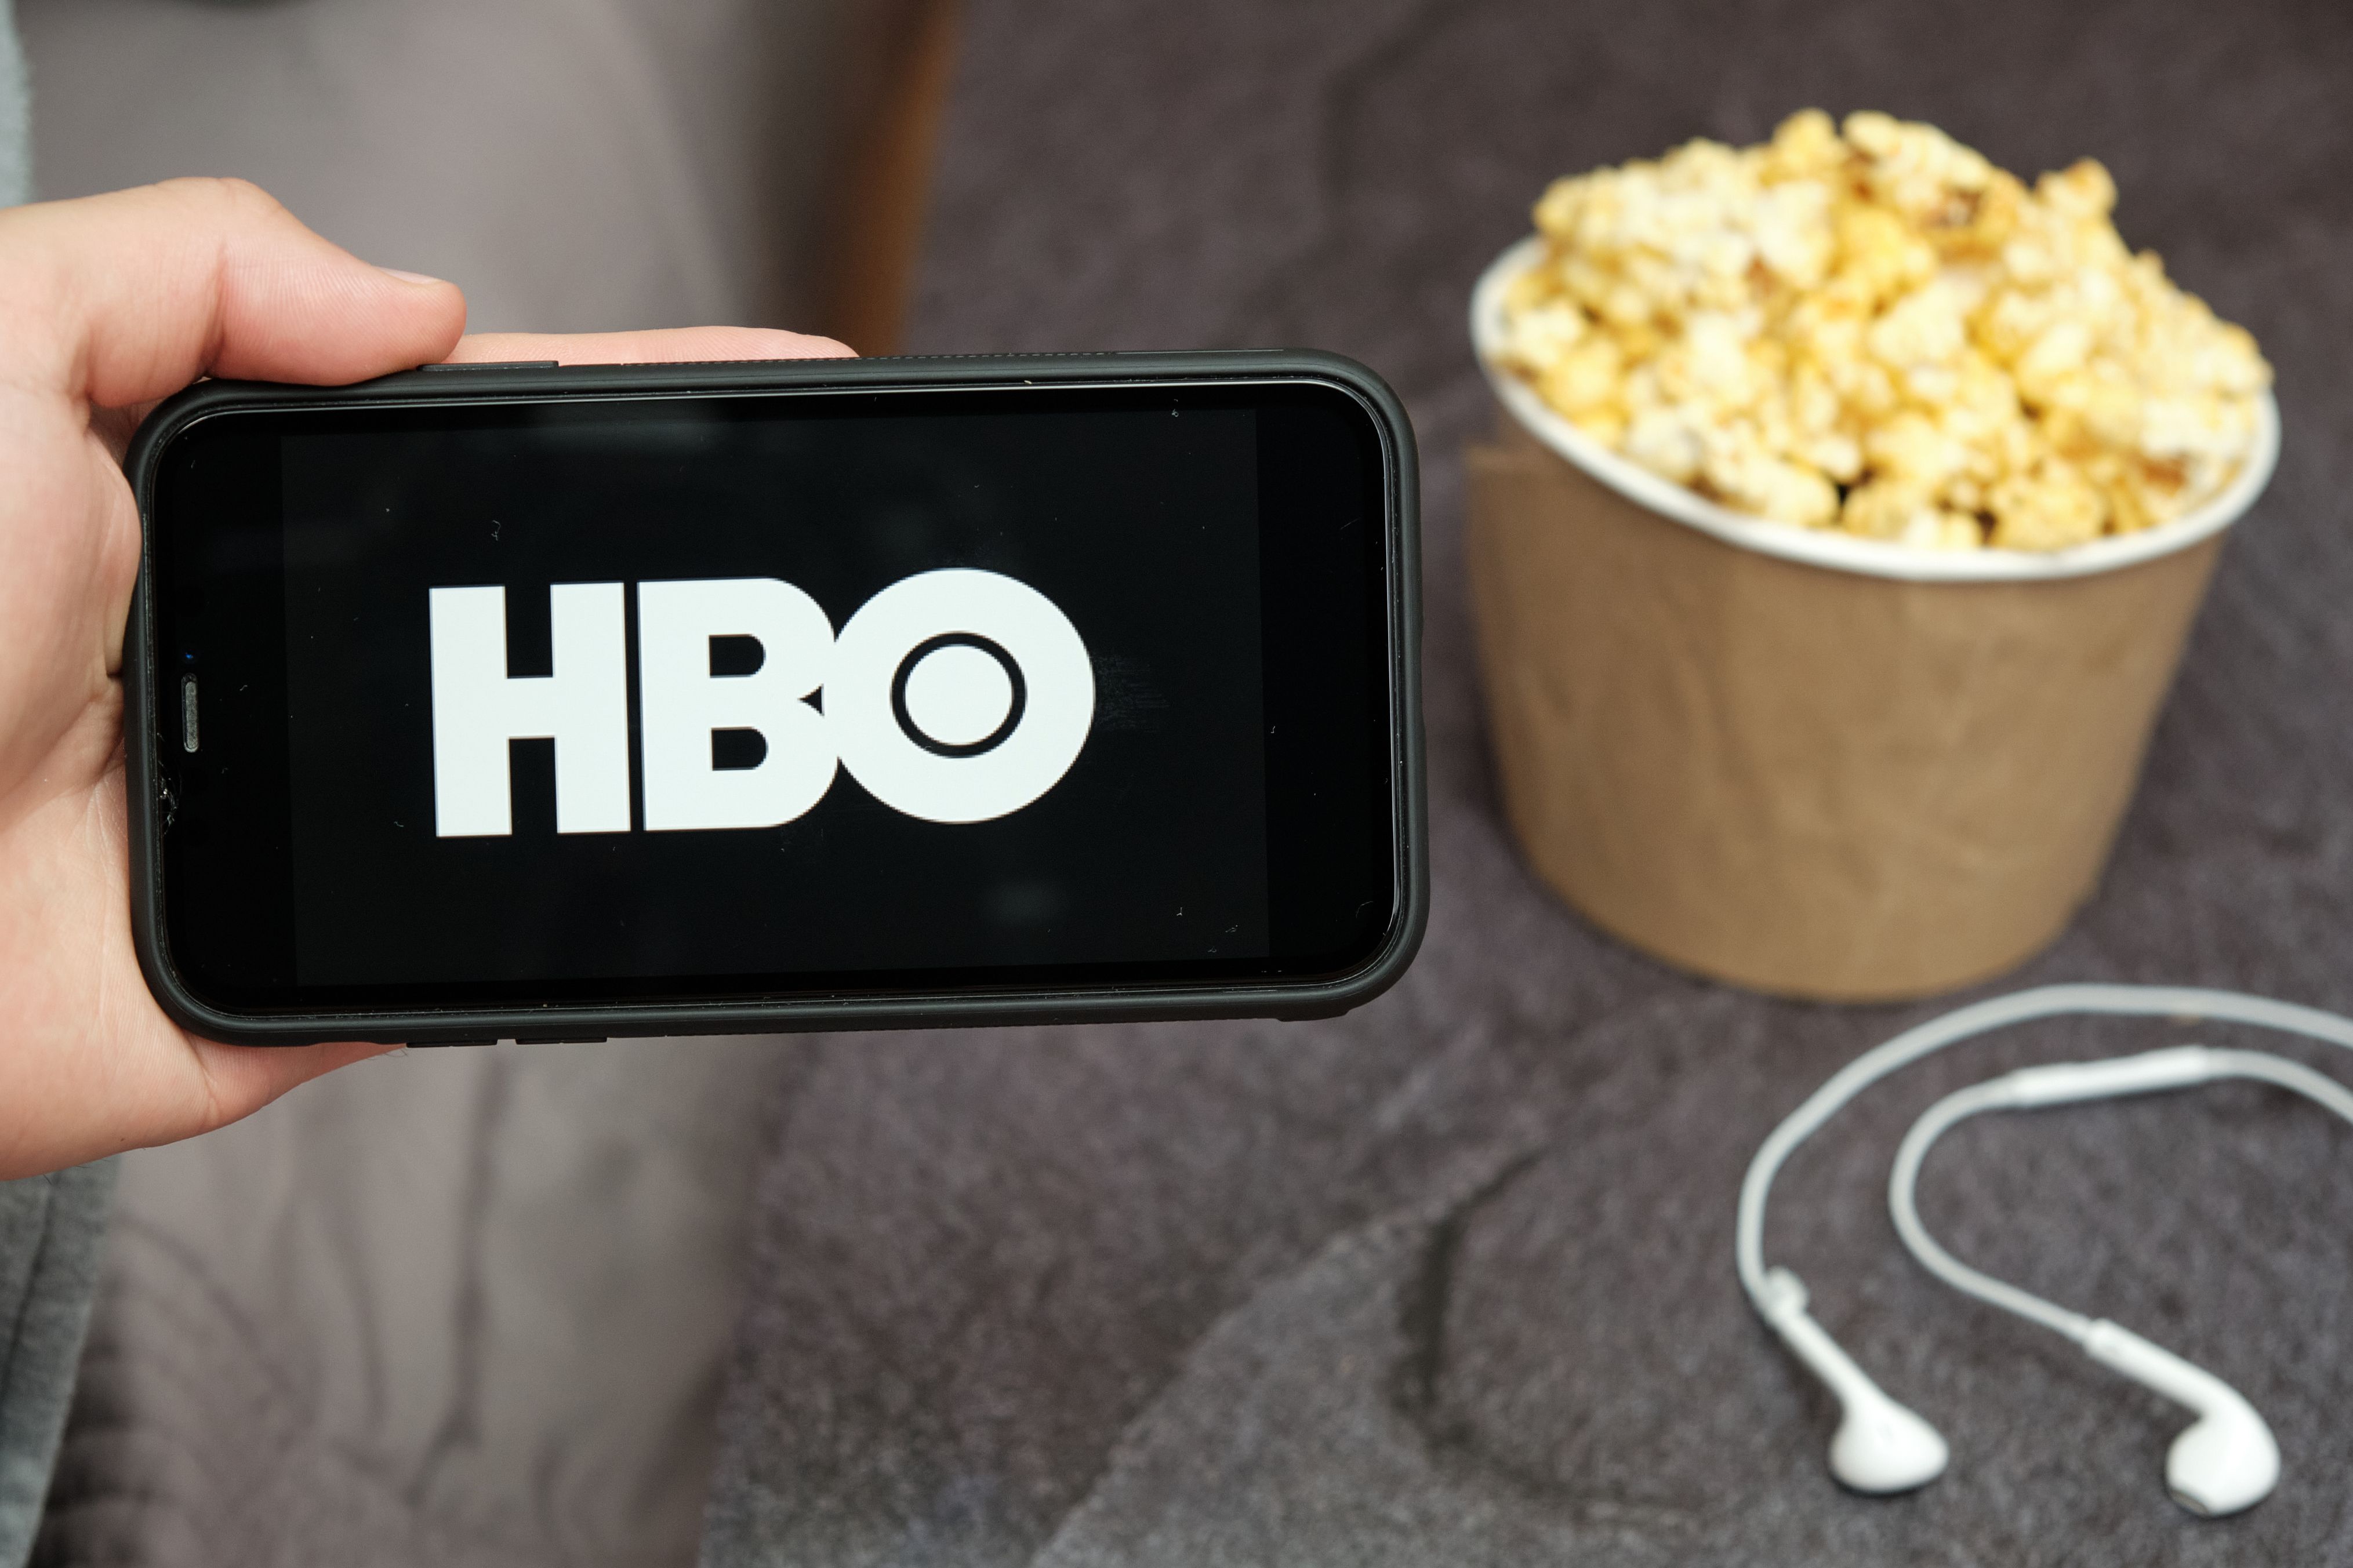 Close up mans hand holding a mobile phone with HBO logo with Apple earphones and popcorn box next to him, August 2020, San Francisco, USA